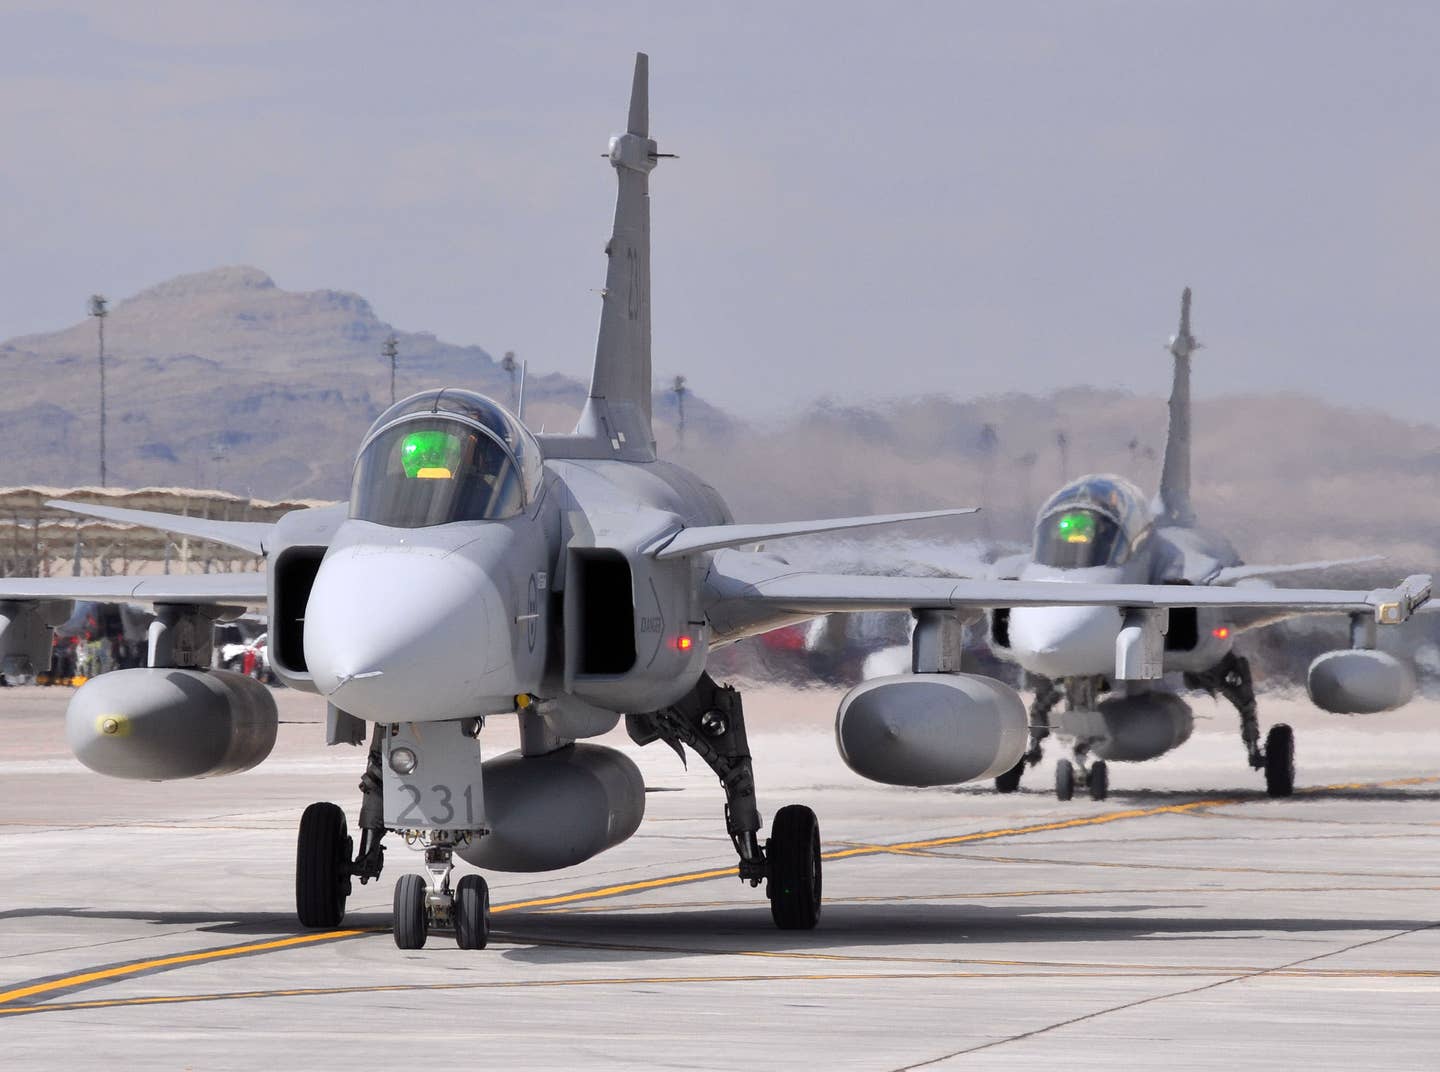 Swedish JAS 39 Gripens at Nellis AFB during the multi-national Red Flag exercise (Photo US Air Force)